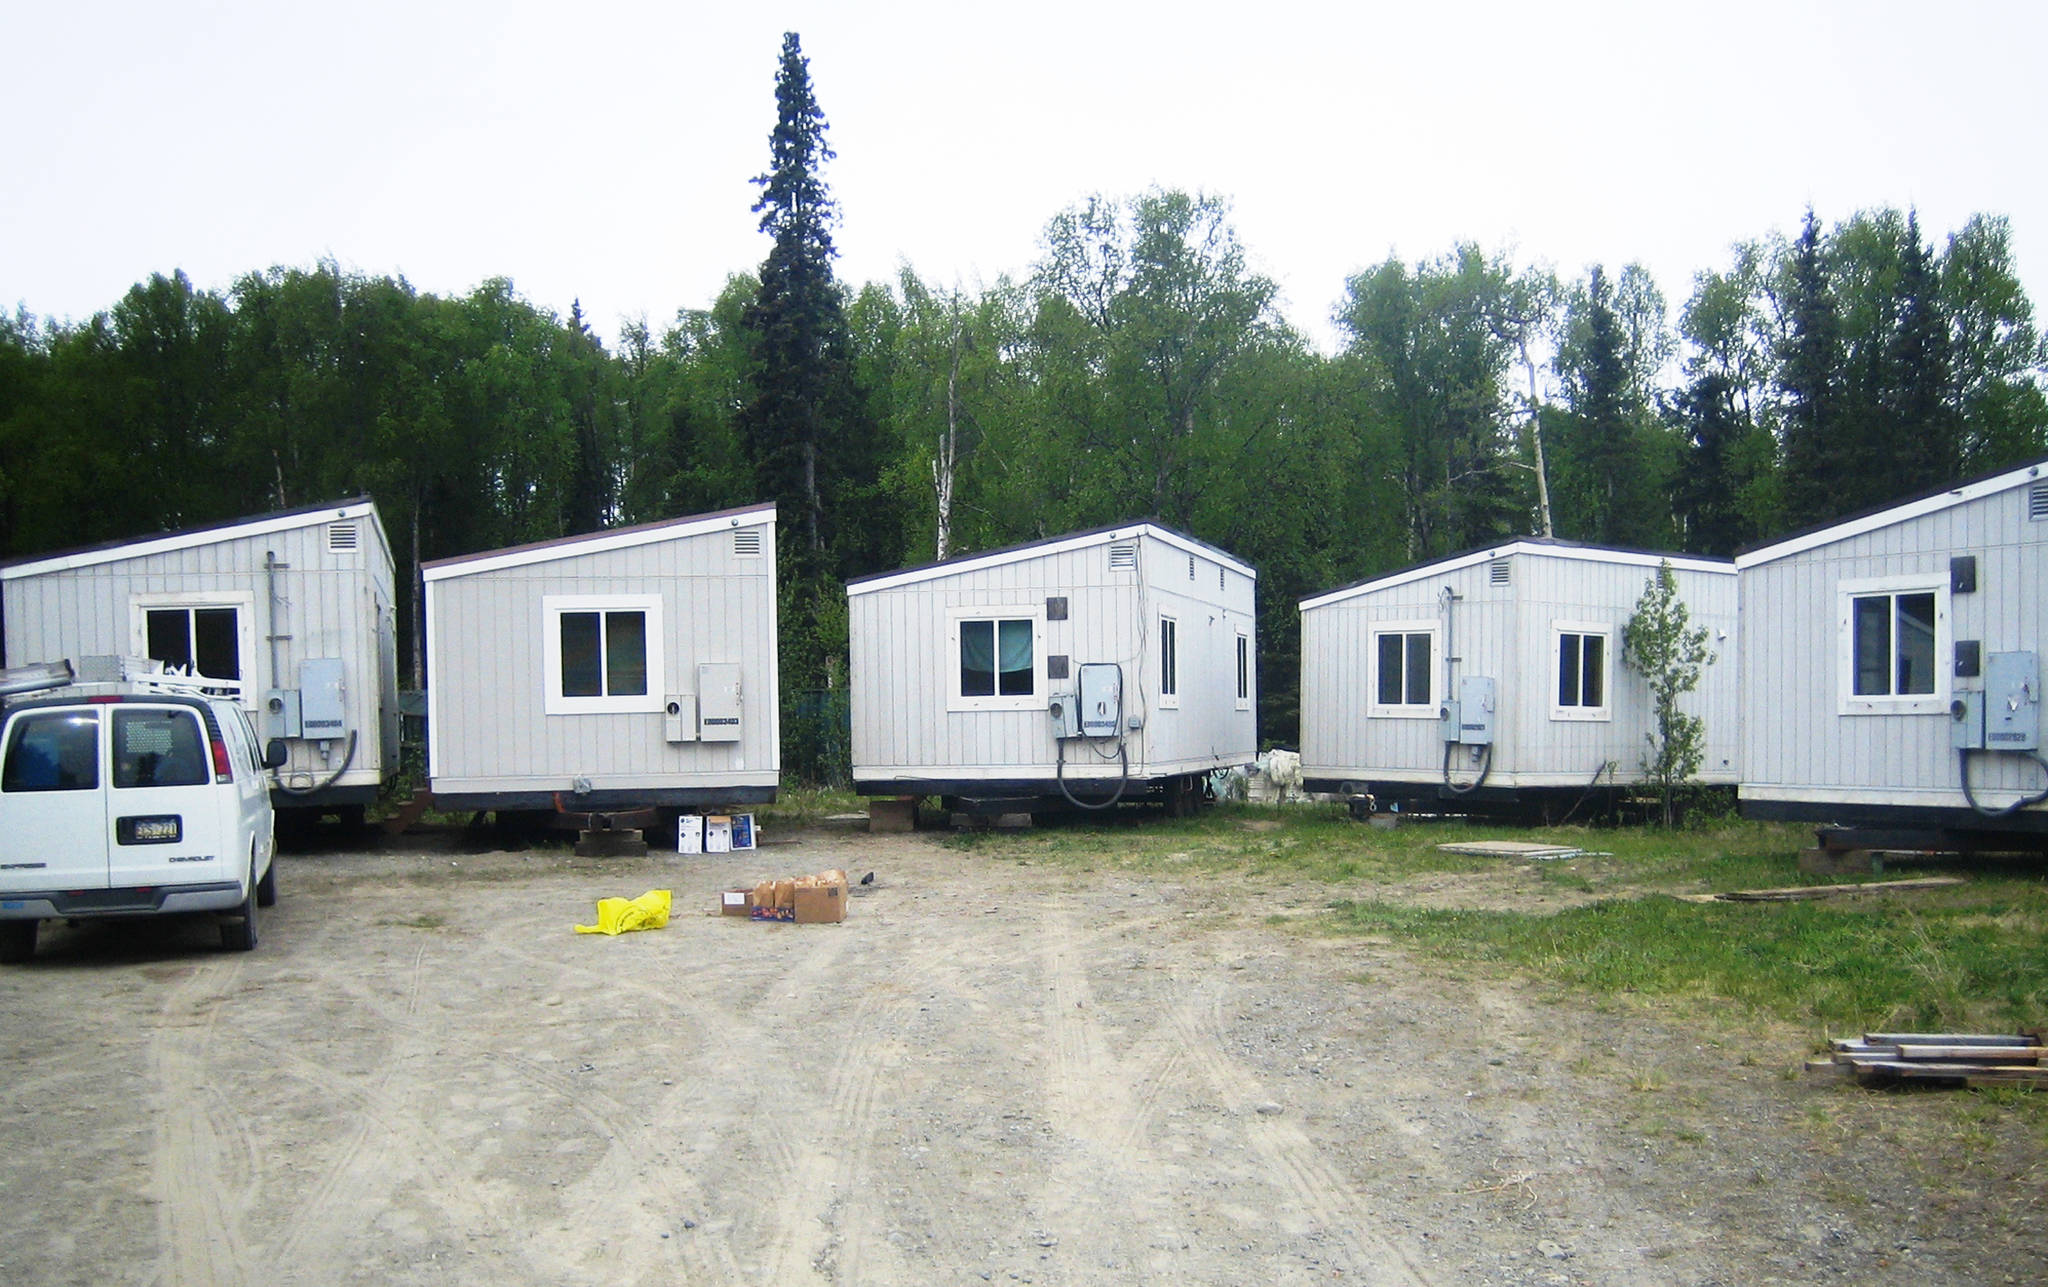 Mobile trailers sit on a parcel of Kenai Peninsula Borough-owned land across from the peninsula’s dump on the Sterling Highway in 2008 shortly after being moved there to serve as a camp for the Yukon Fire Crew. The land is leased by the nonprofit Chugachmiut, Inc. to provide a place for the hotshot crew to live while based on the peninsula during fire season. Now, the corporation is seeking a grant that will allow the construction of a permanent base on a difference piece of land it bought in 2011. (Photo courtesy Charles Sink)